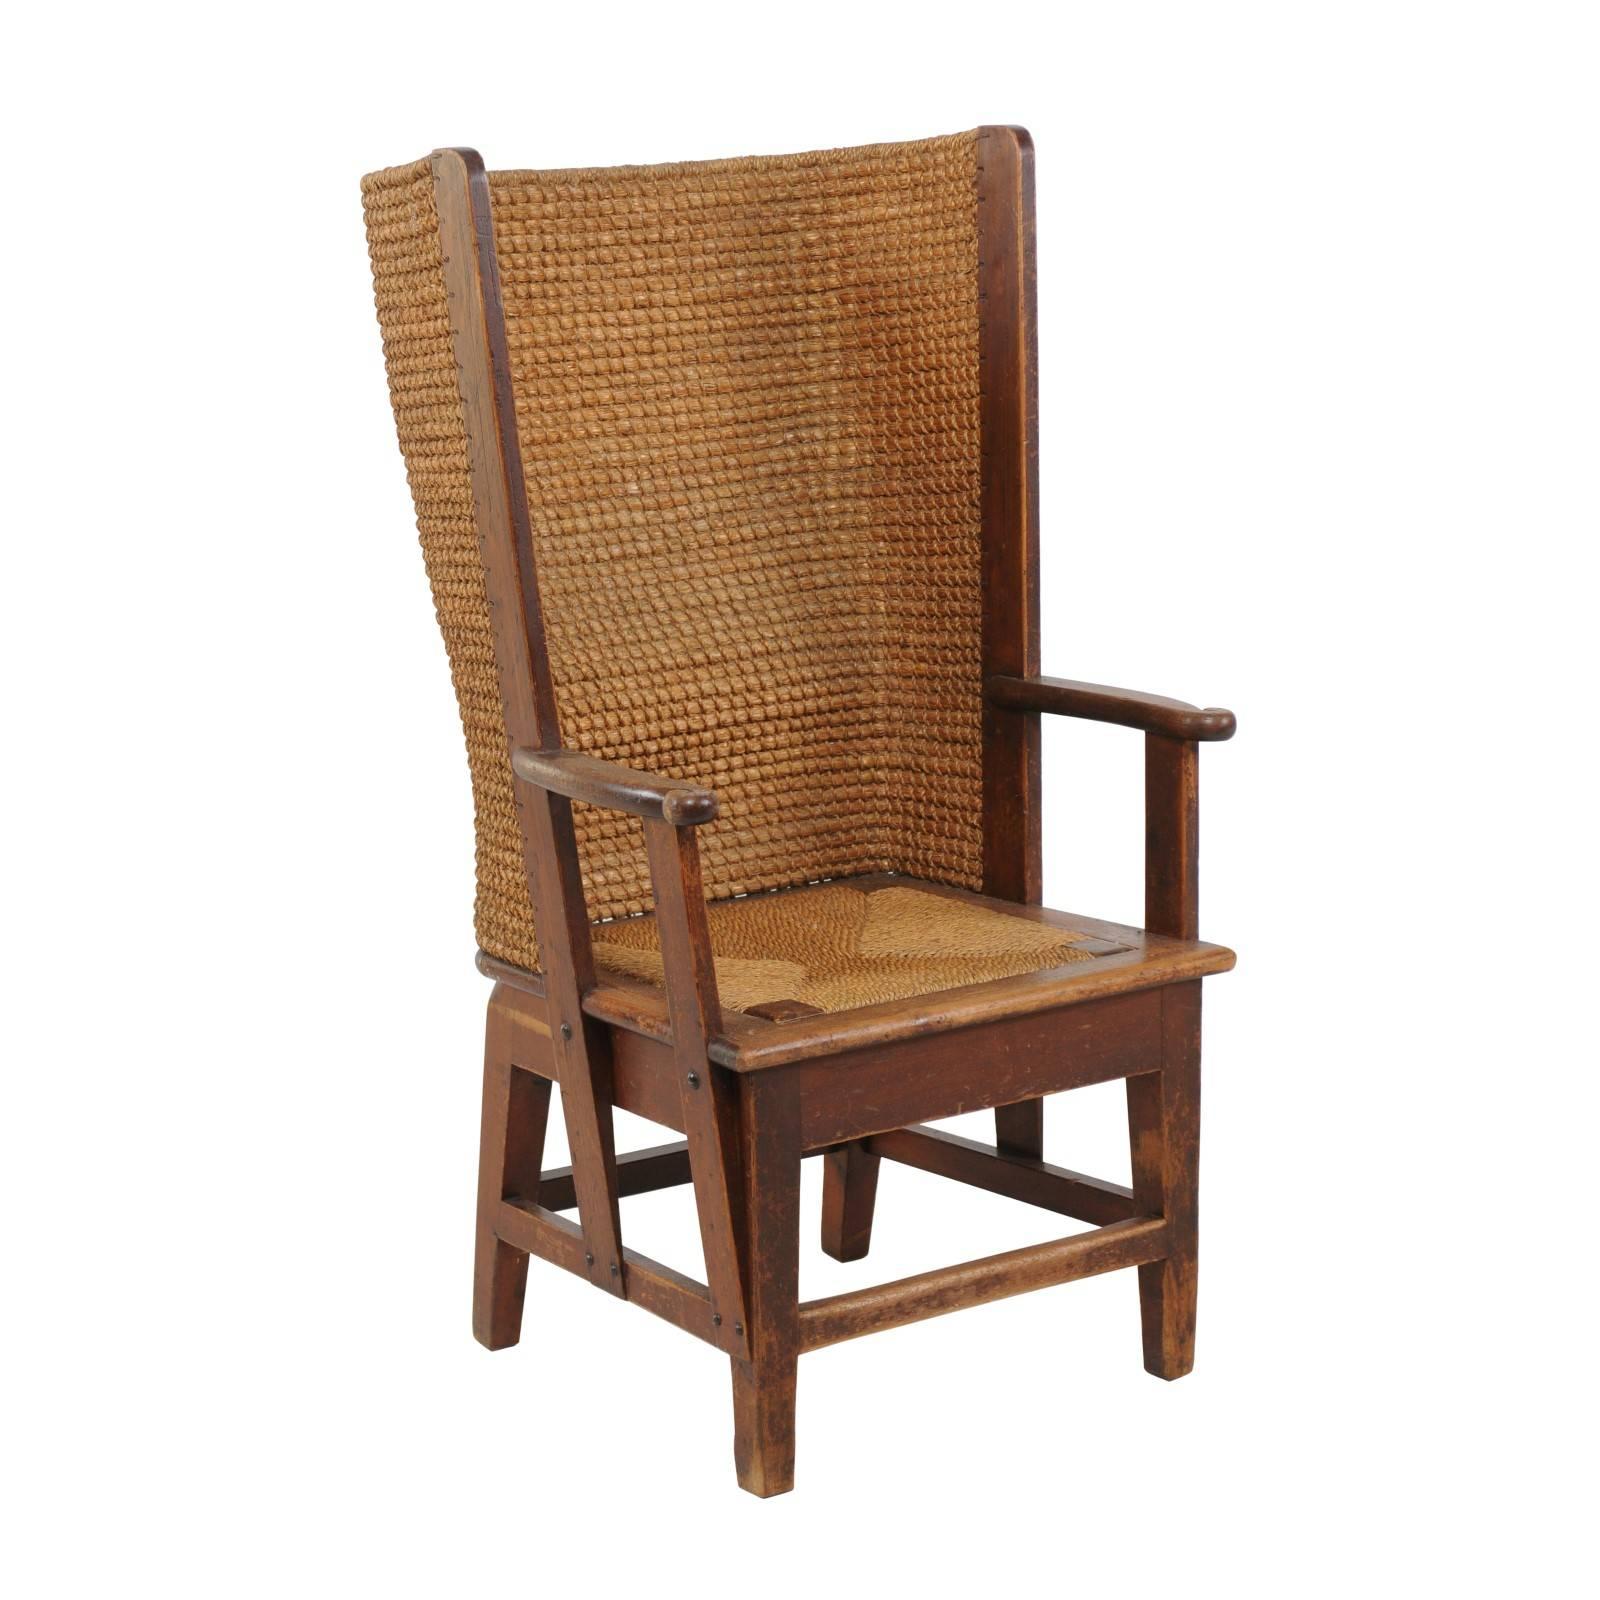 Scottish Late 19th Century Orkney Chair with Wraparound Handwoven Straw Back